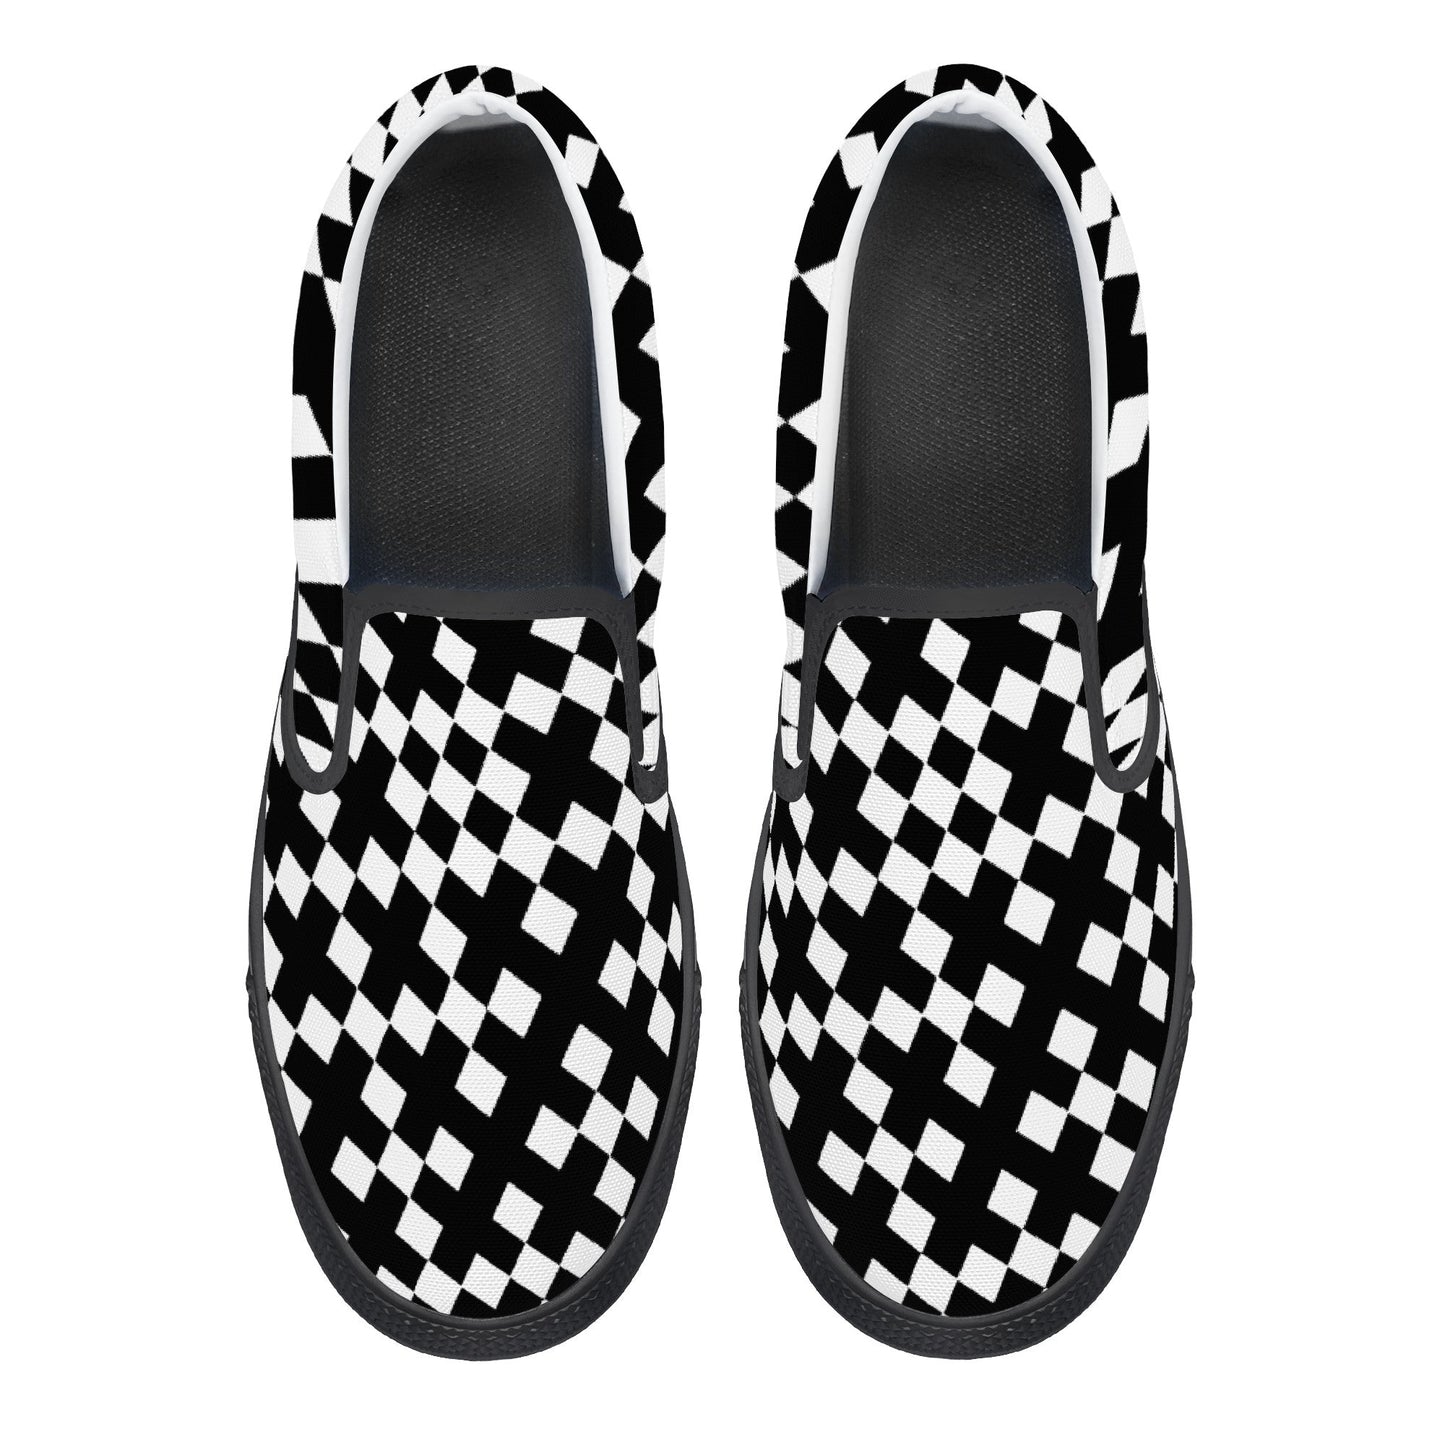 CHECKERTONE Slip-on Sneakers | CANAANWEAR | Shoes | slip on shoes